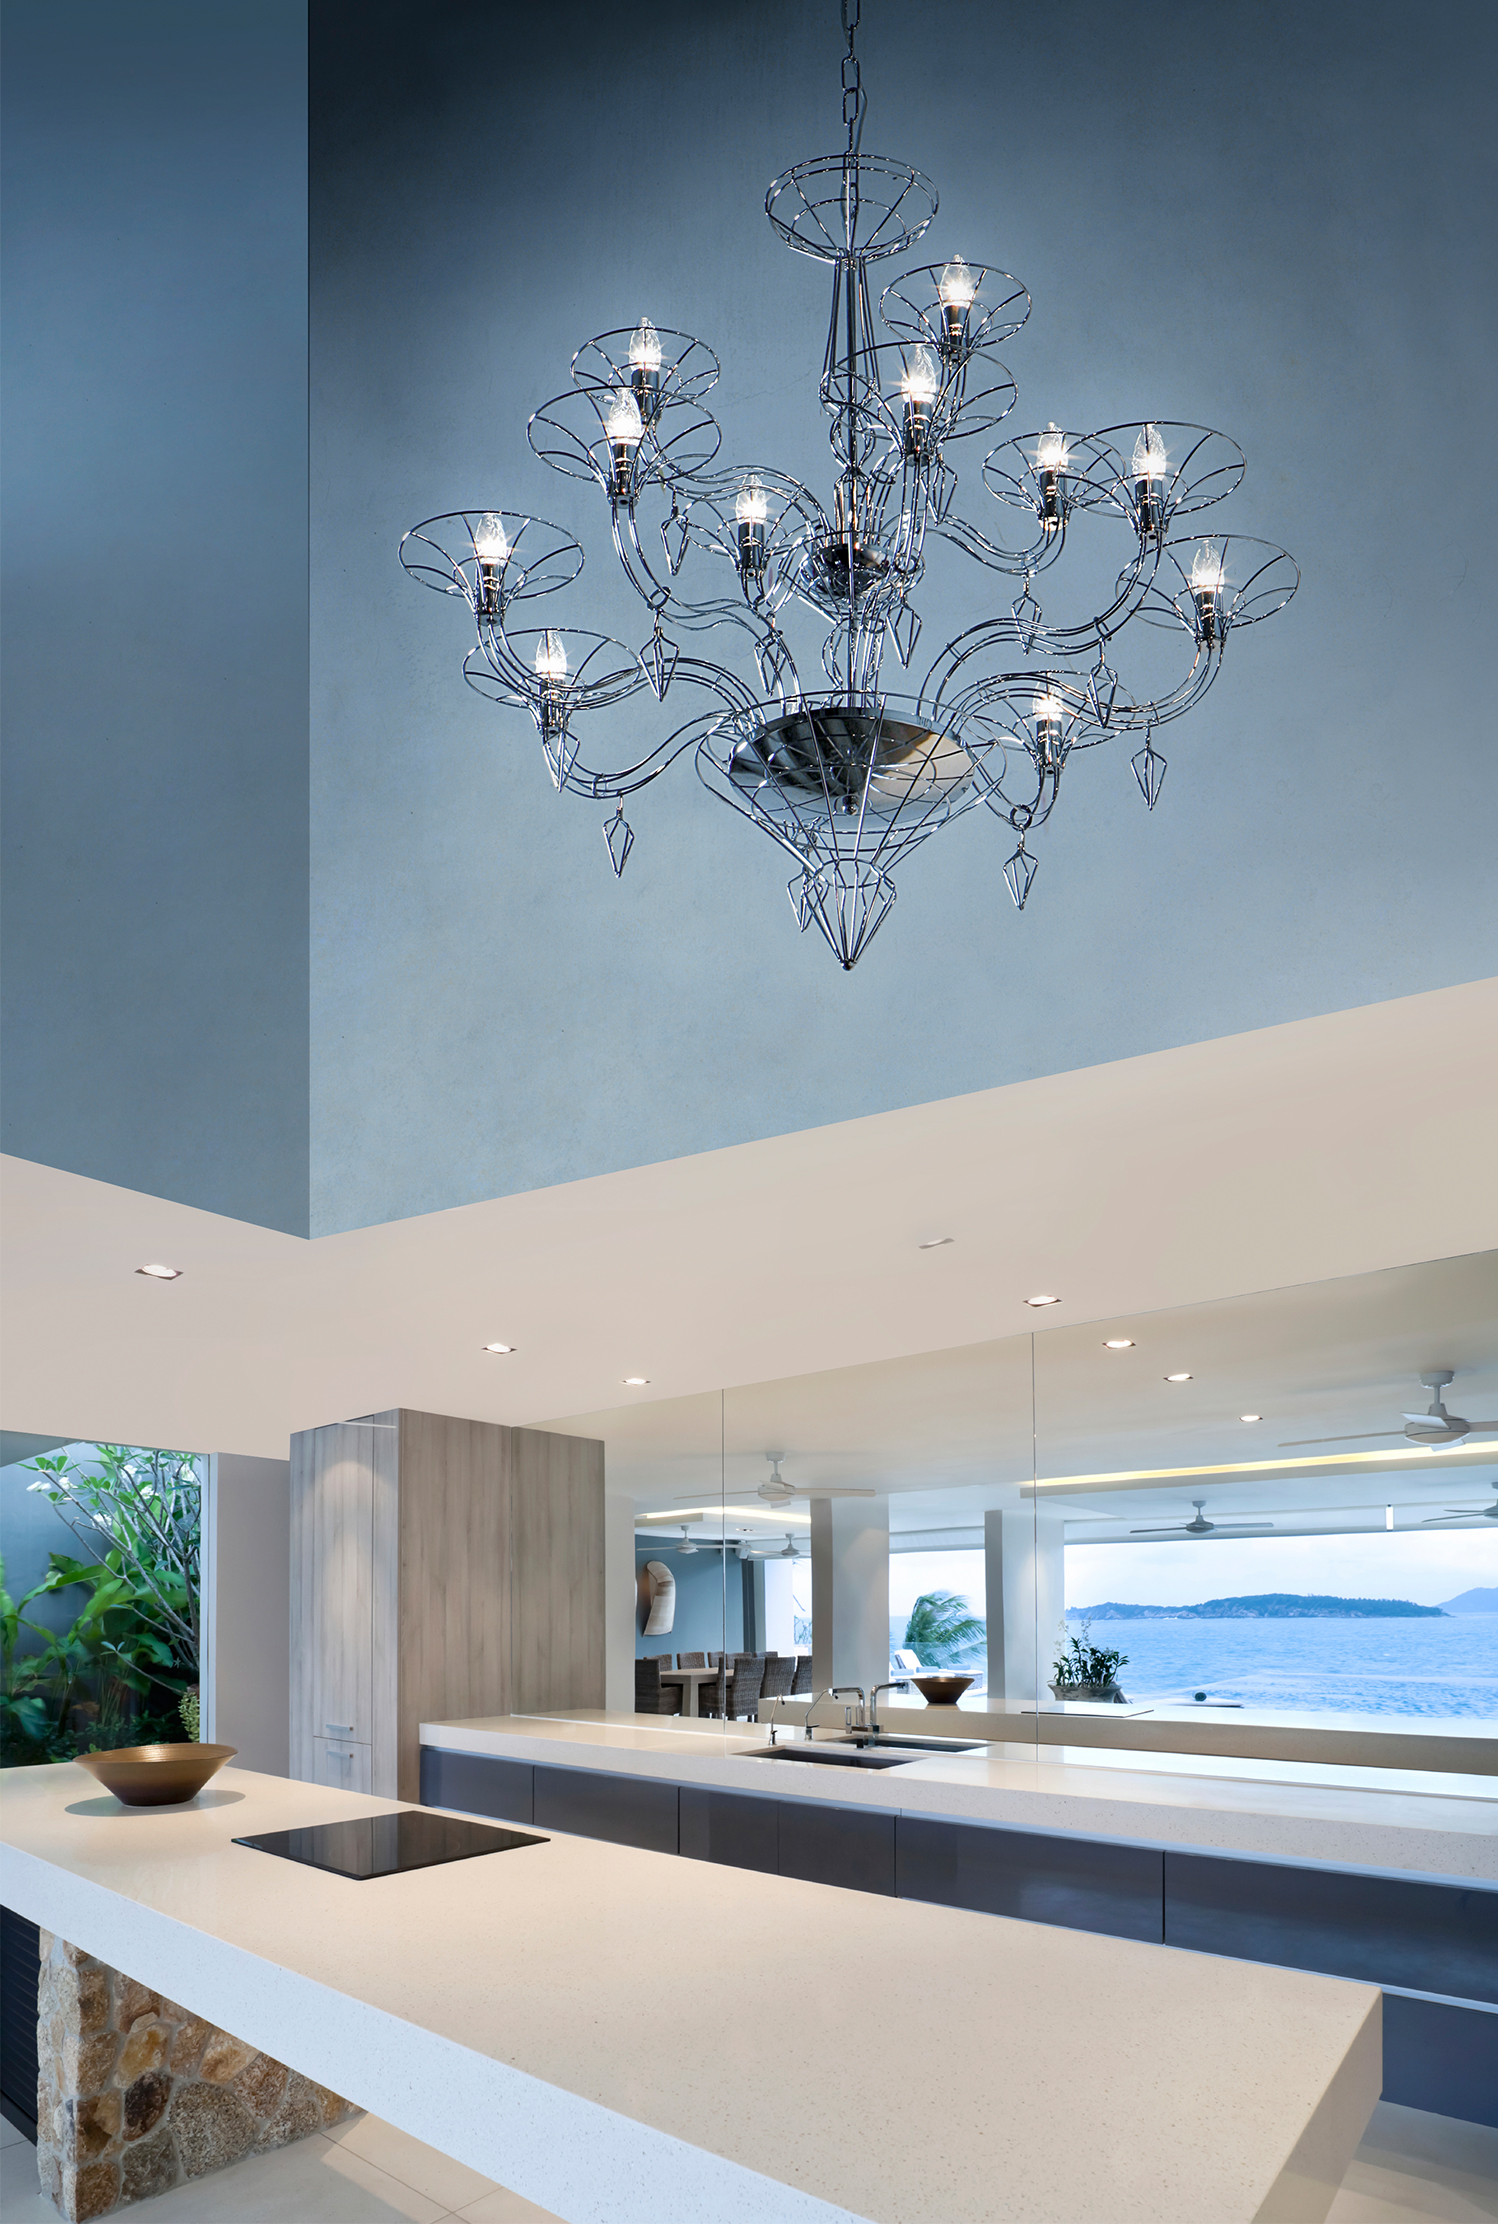 Dedalo is a collection of chandeliers that use the glass-blowing technologies from the Venetian island of Murano 